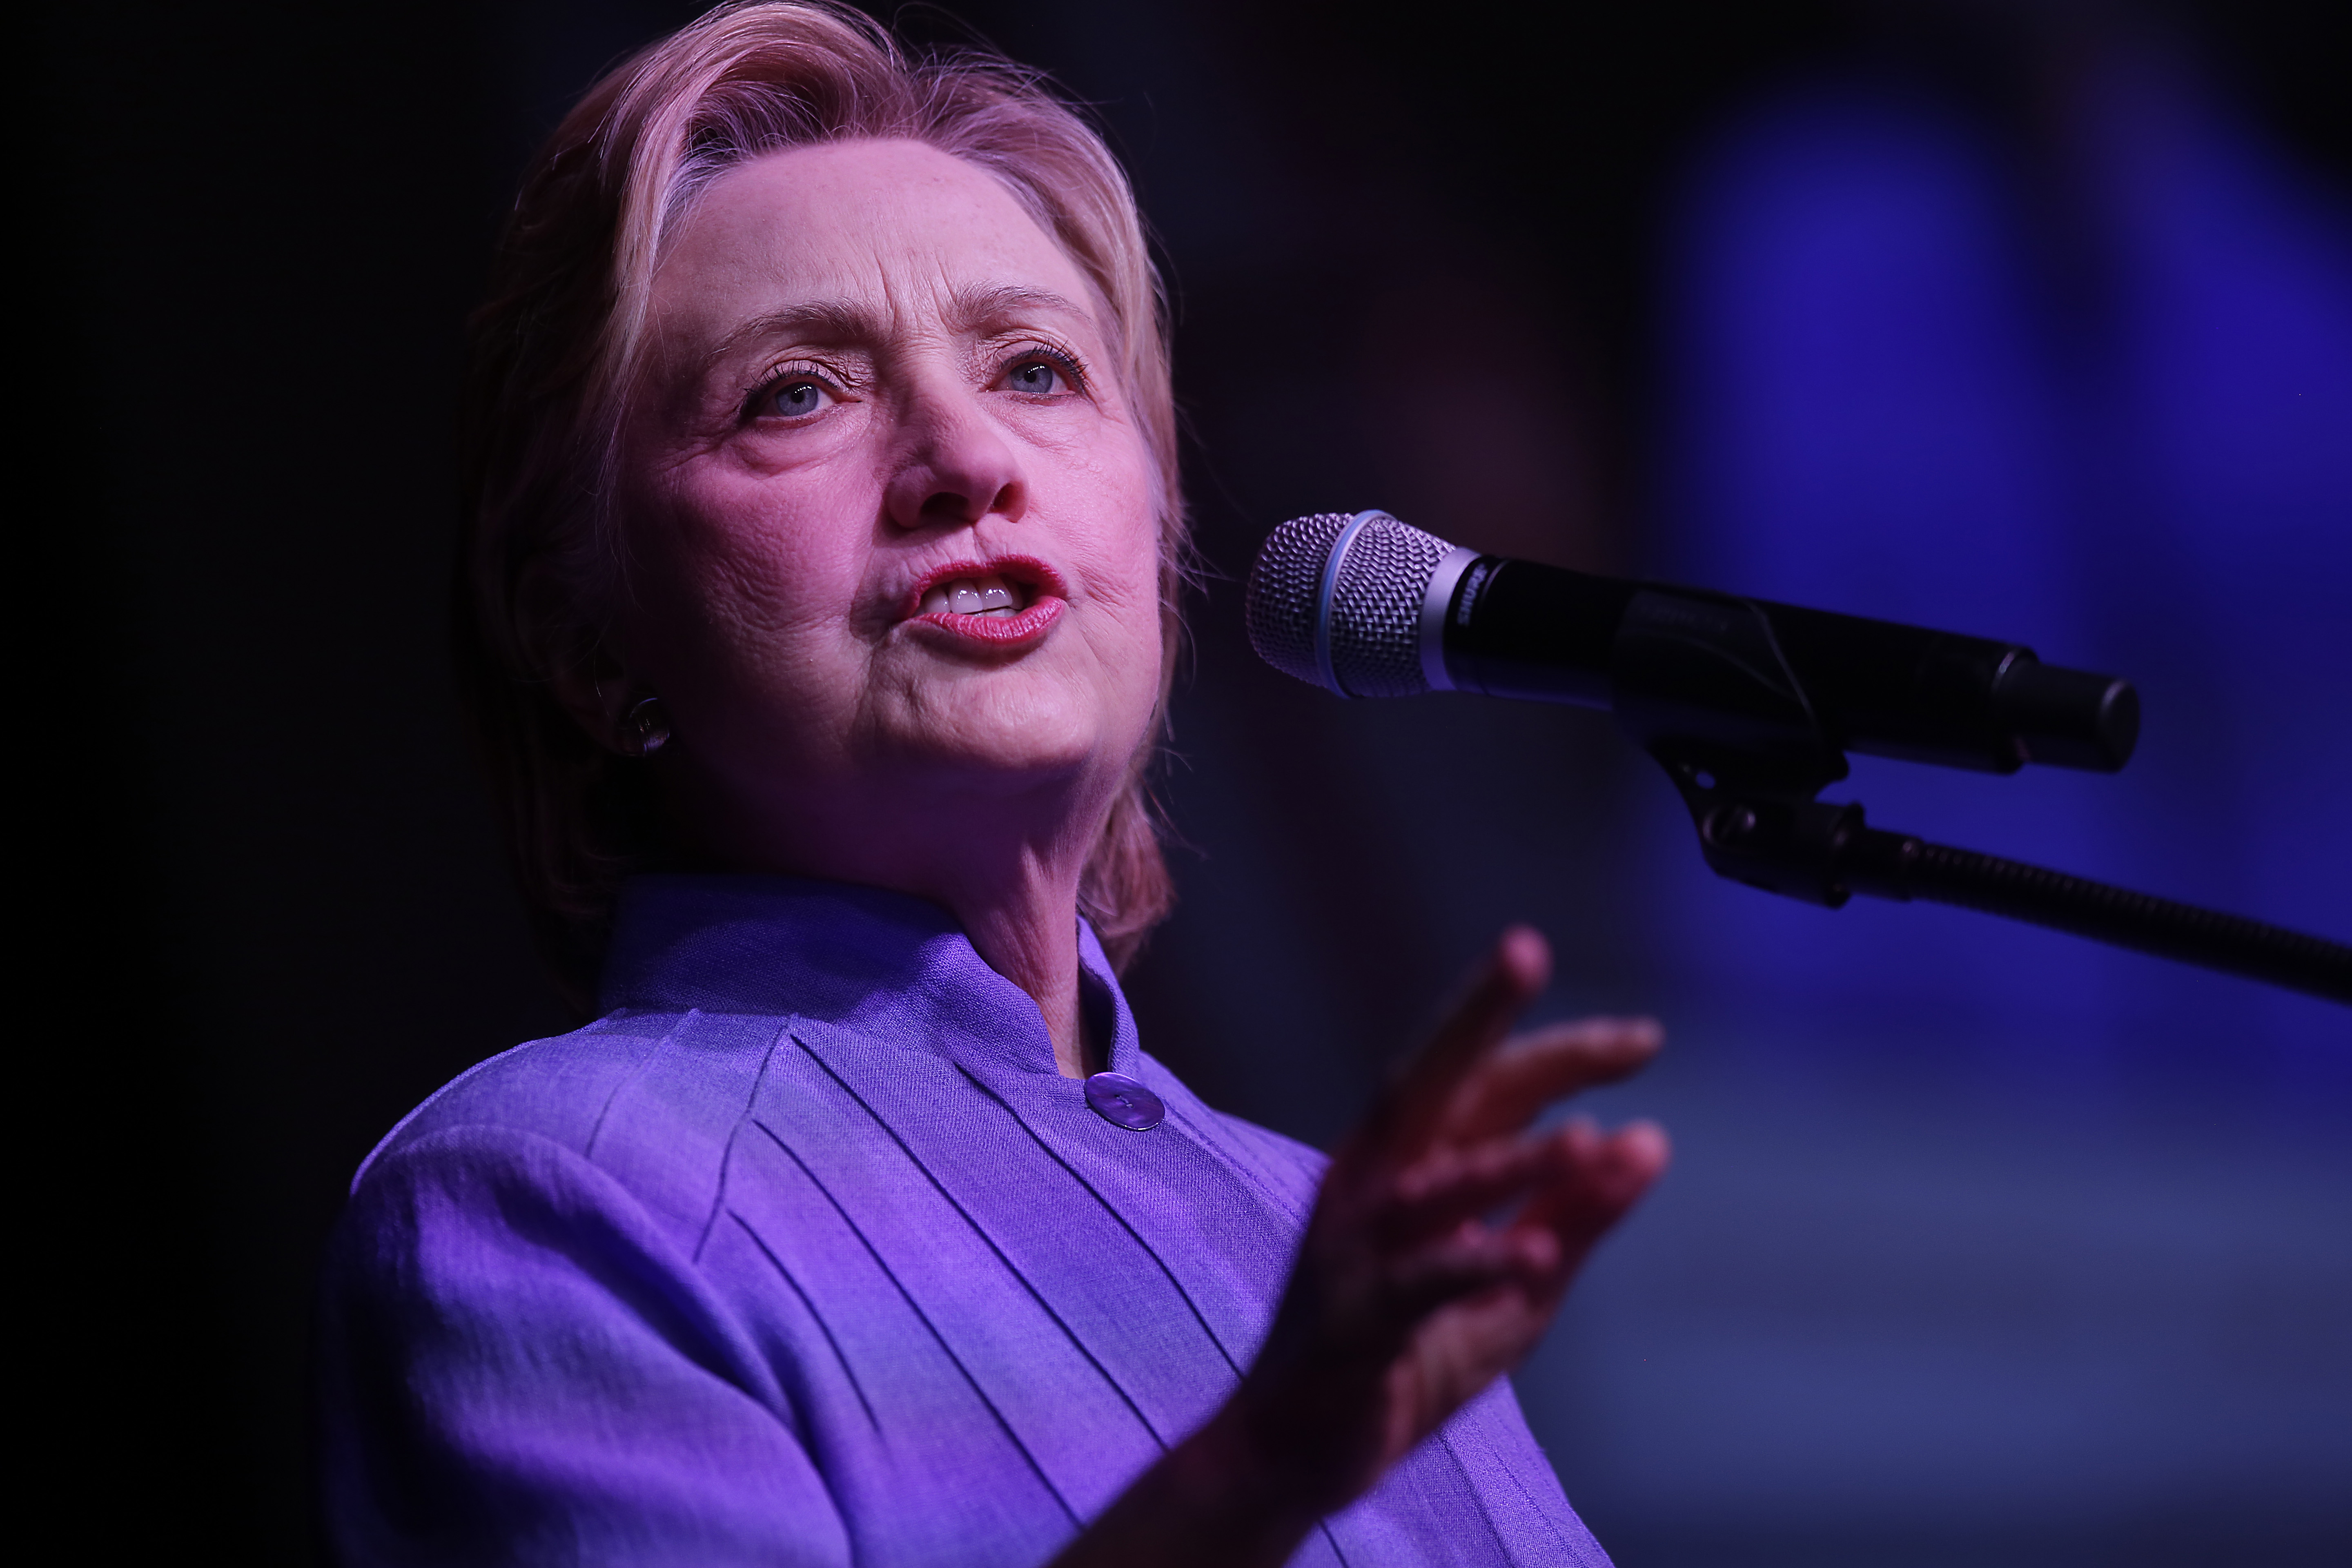 CHICAGO, IL - JUNE 27: Democratic presidential candidate Hillary Clinton delivers the keynote speech during the Rainbow PUSH Coalition's International Women's Luncheon June 27, 2016 in Chicago Illinois. Clinton addressed gun violence across the country and referred to the Orlando, Florida Pulse nightclub shooting and the uptick in gun crime across Chicago. ( Photo by Joshua Lott/Getty Images)